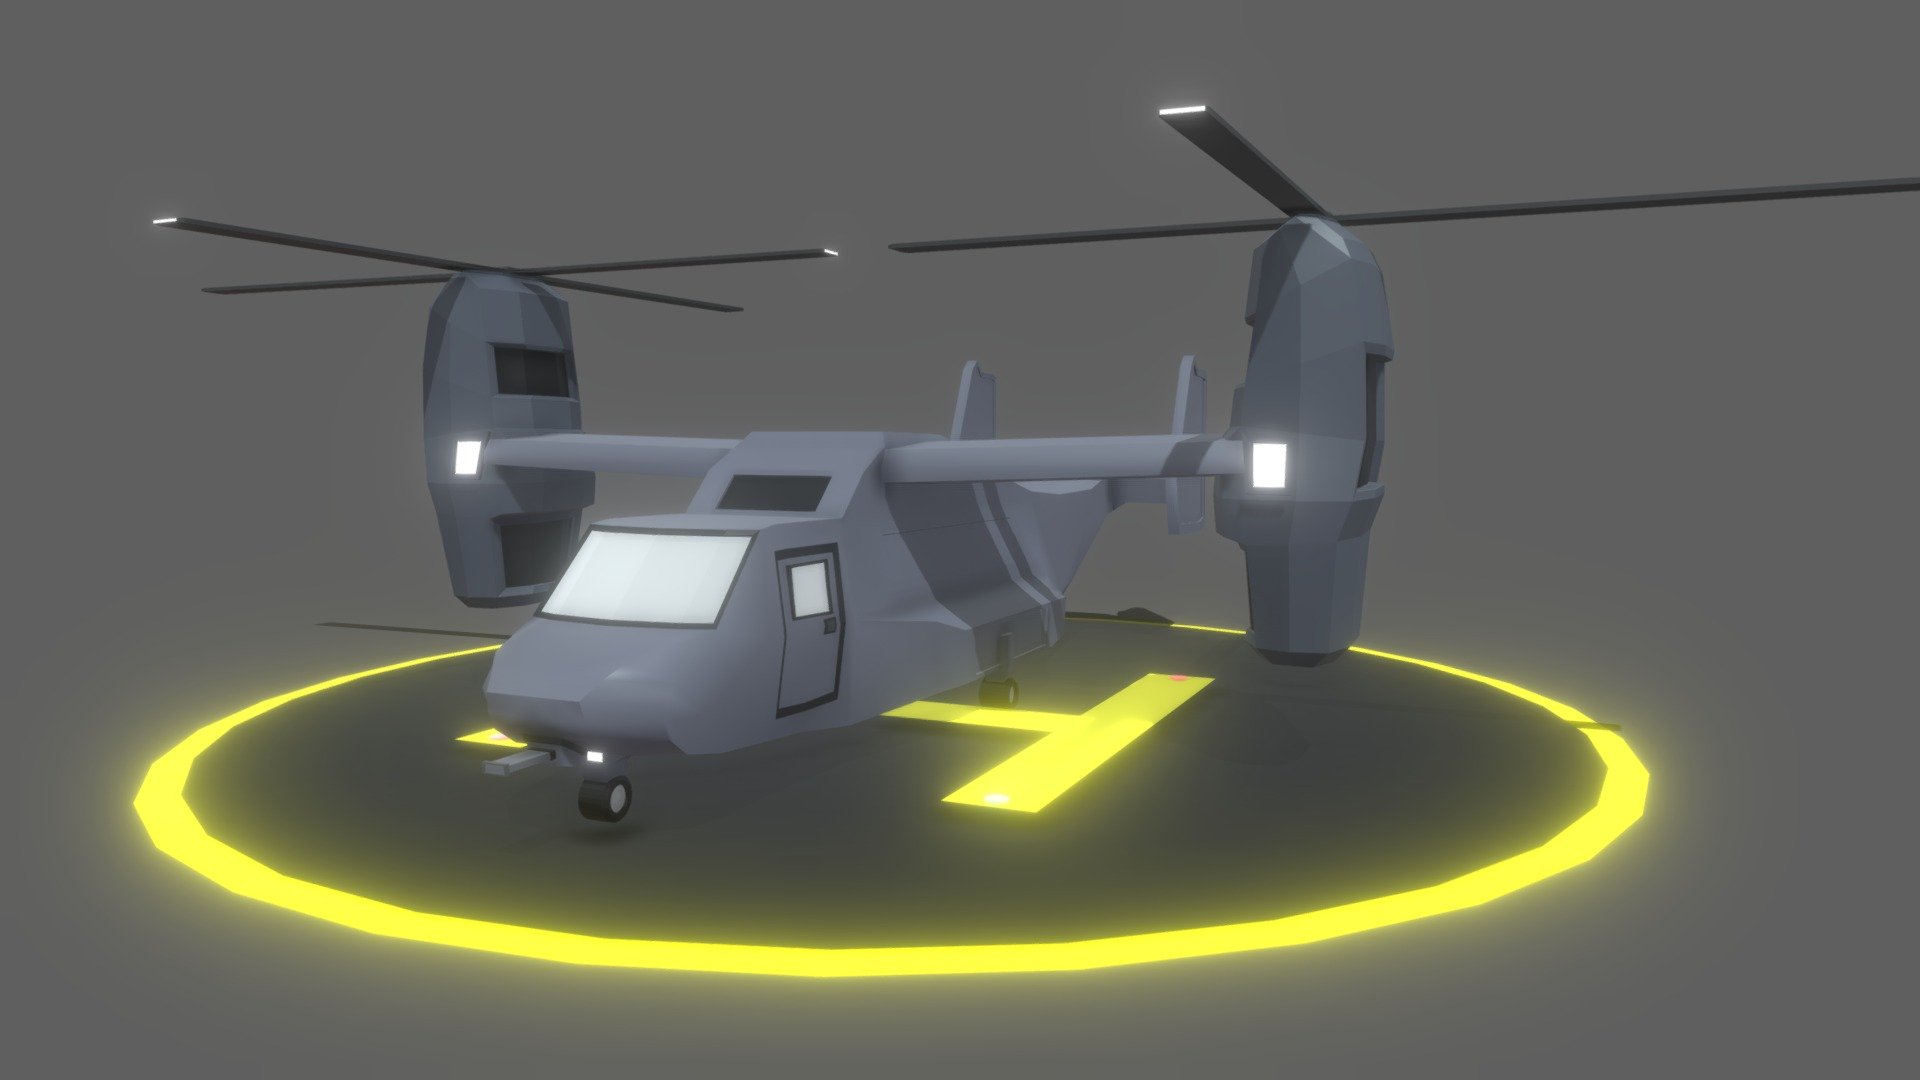 my v-22 low poly that i made, feel free to use it :)
I really appreciate it if you gave me a credit :) - V-22 Low Poly - 3D model by Arifido._ 3d model